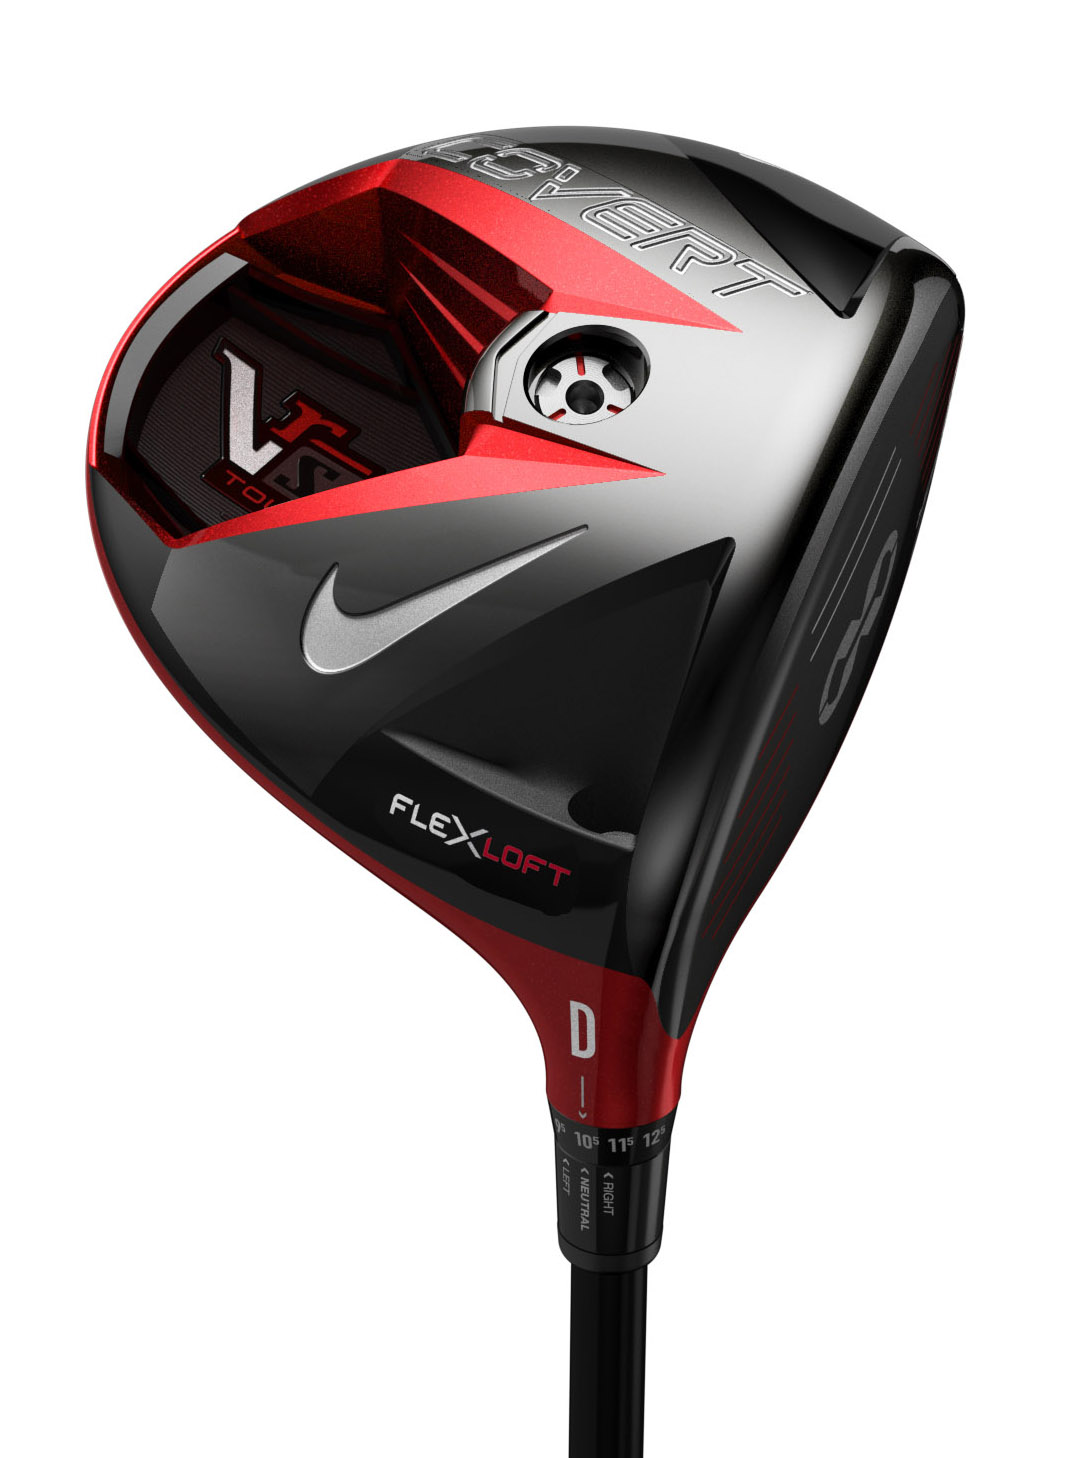 The new Nike VR_S Covert driver features a cavity back and "FlexLoft" technology for customization.